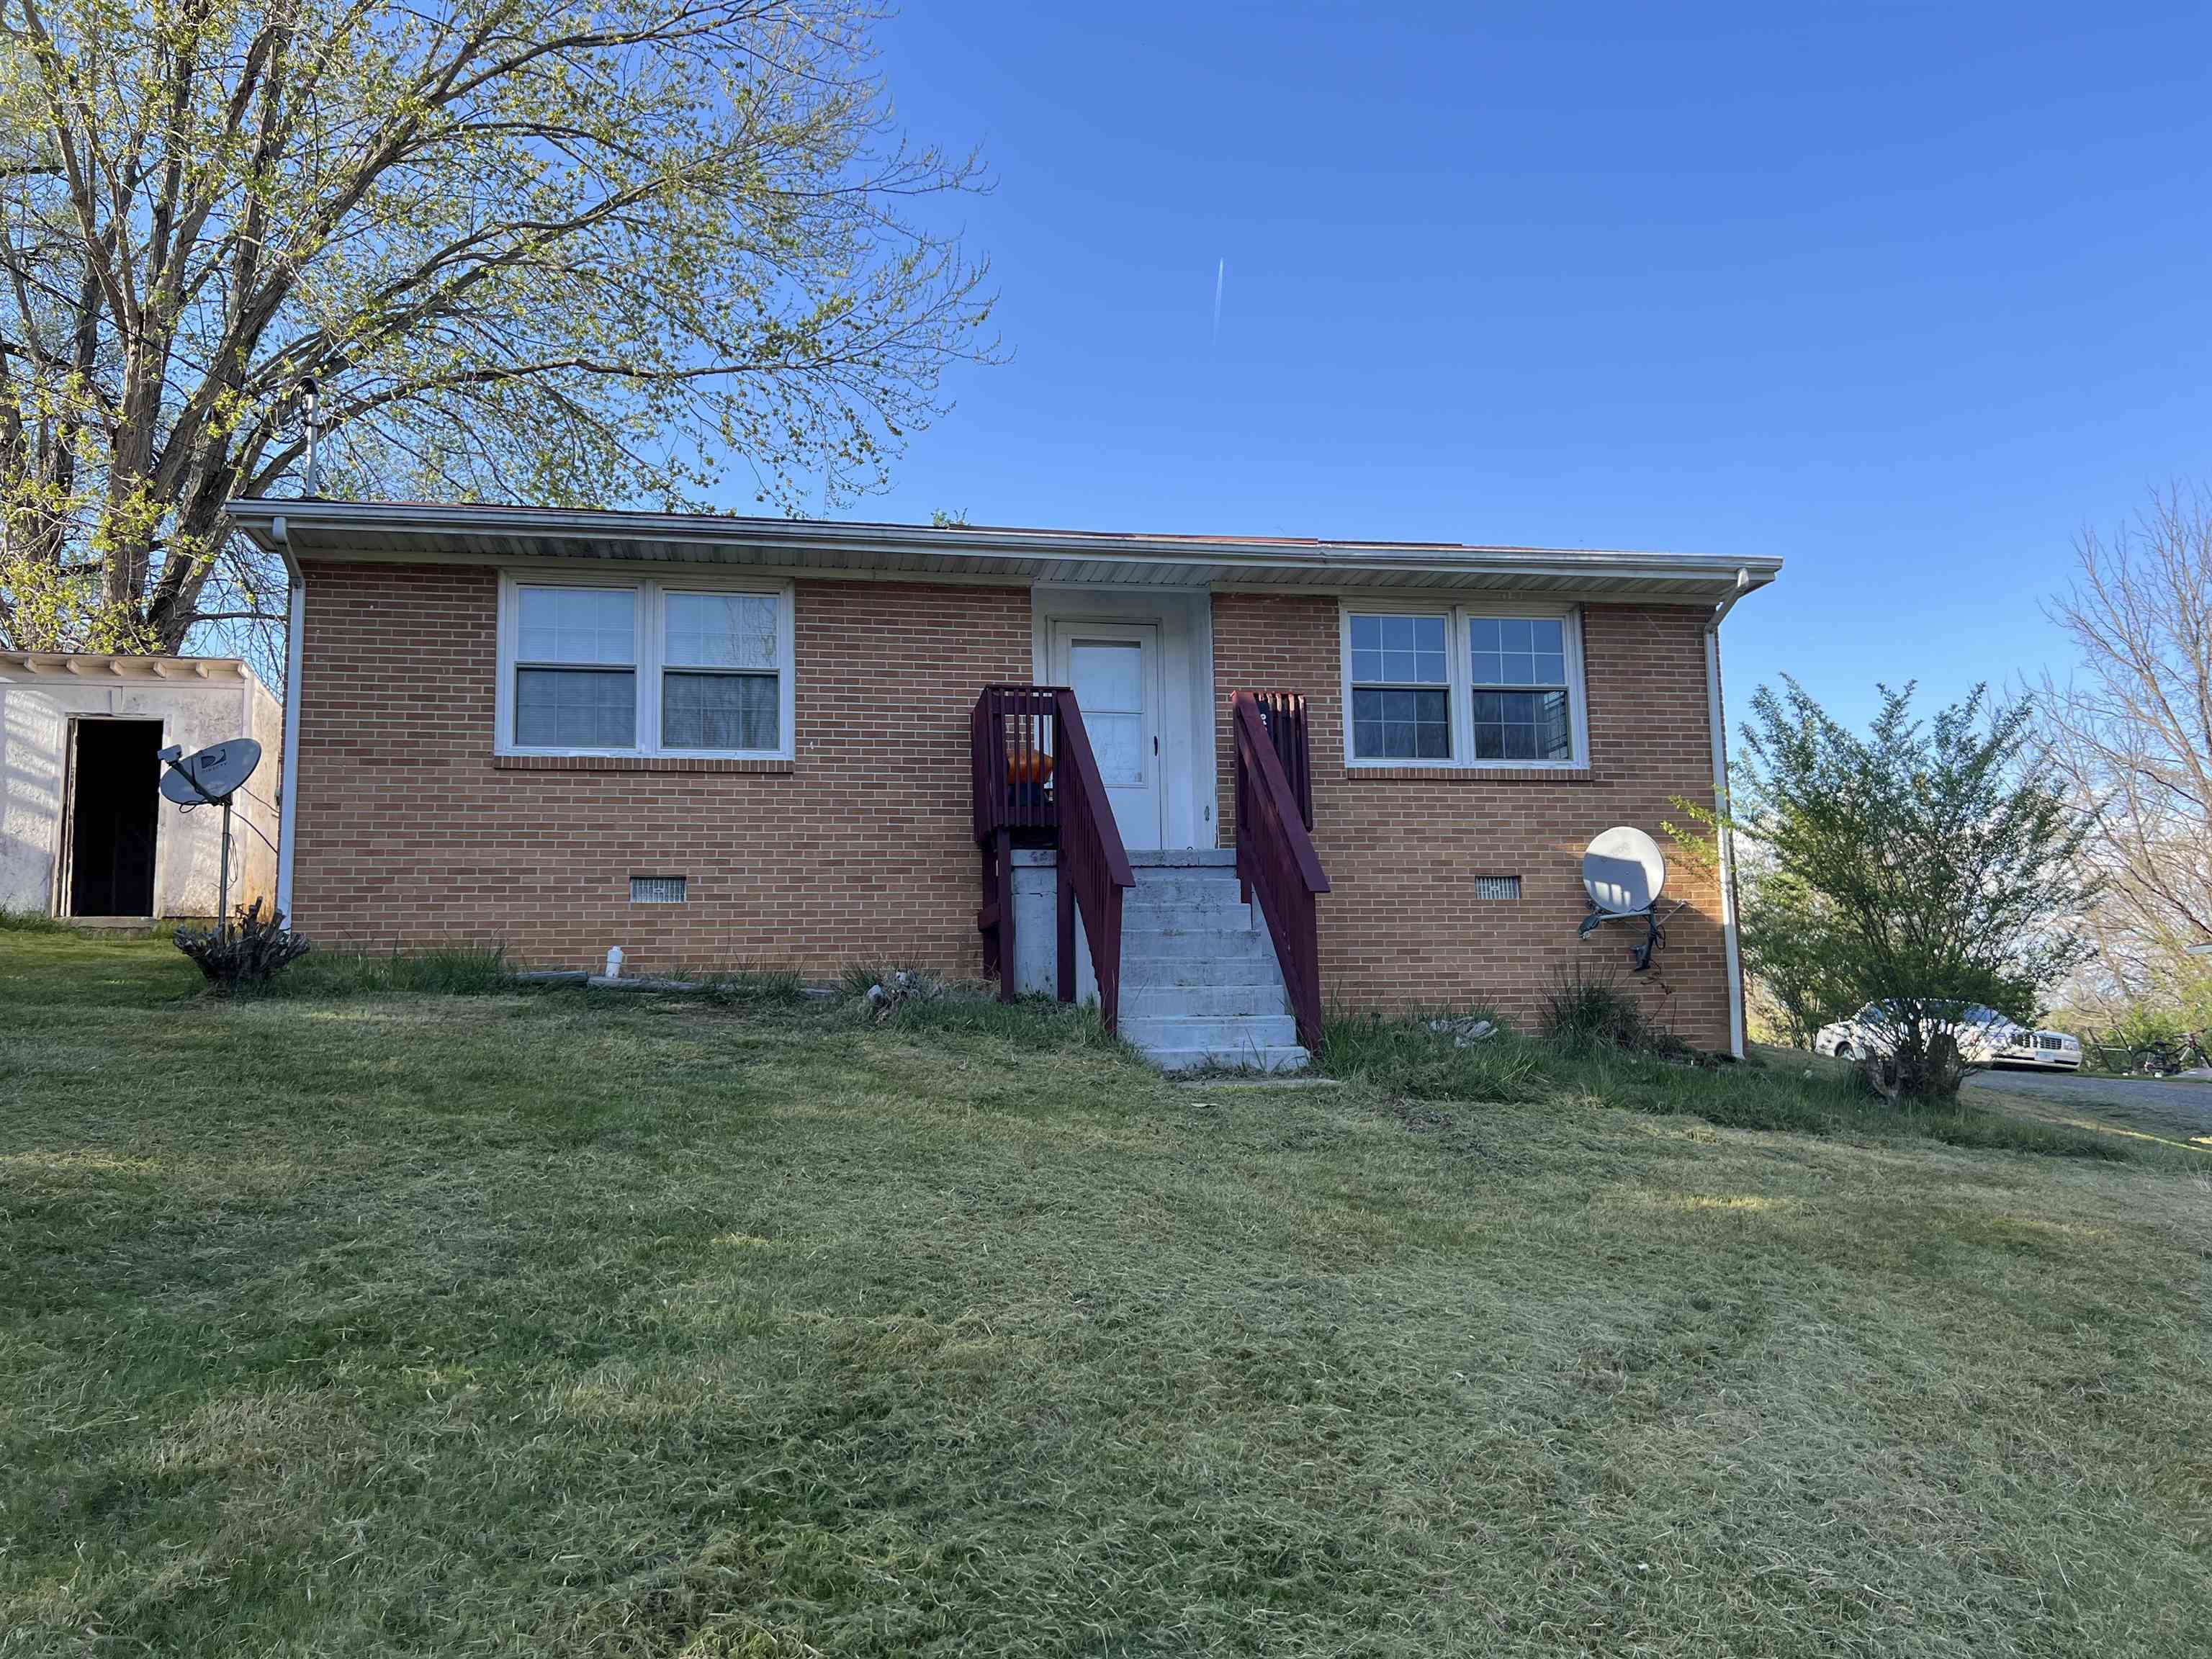 Cute 2 Bedroom 1 Bath Brick Ranch on a Crawspace. The Home has a Large Living Room and hard wood Flooring. The Home has a Heat pump and a Nice Yard. Come Check  this Home out before its gone.